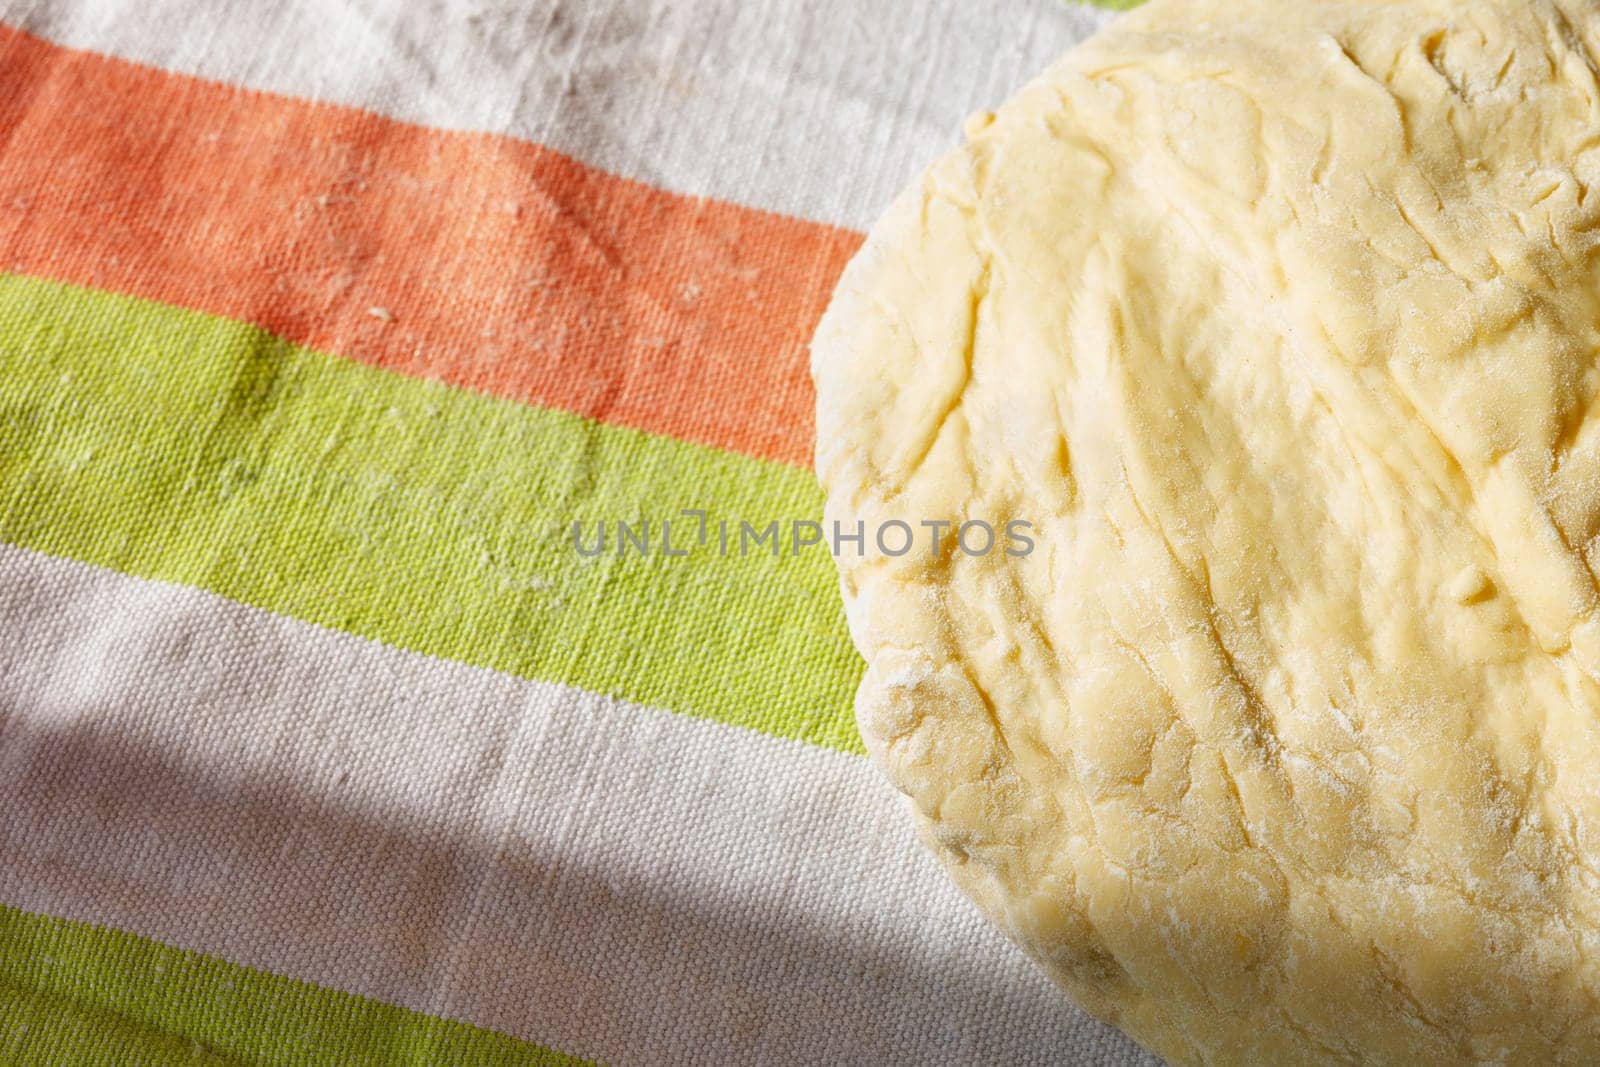 Raw dough on cloth surface ,baker occupation